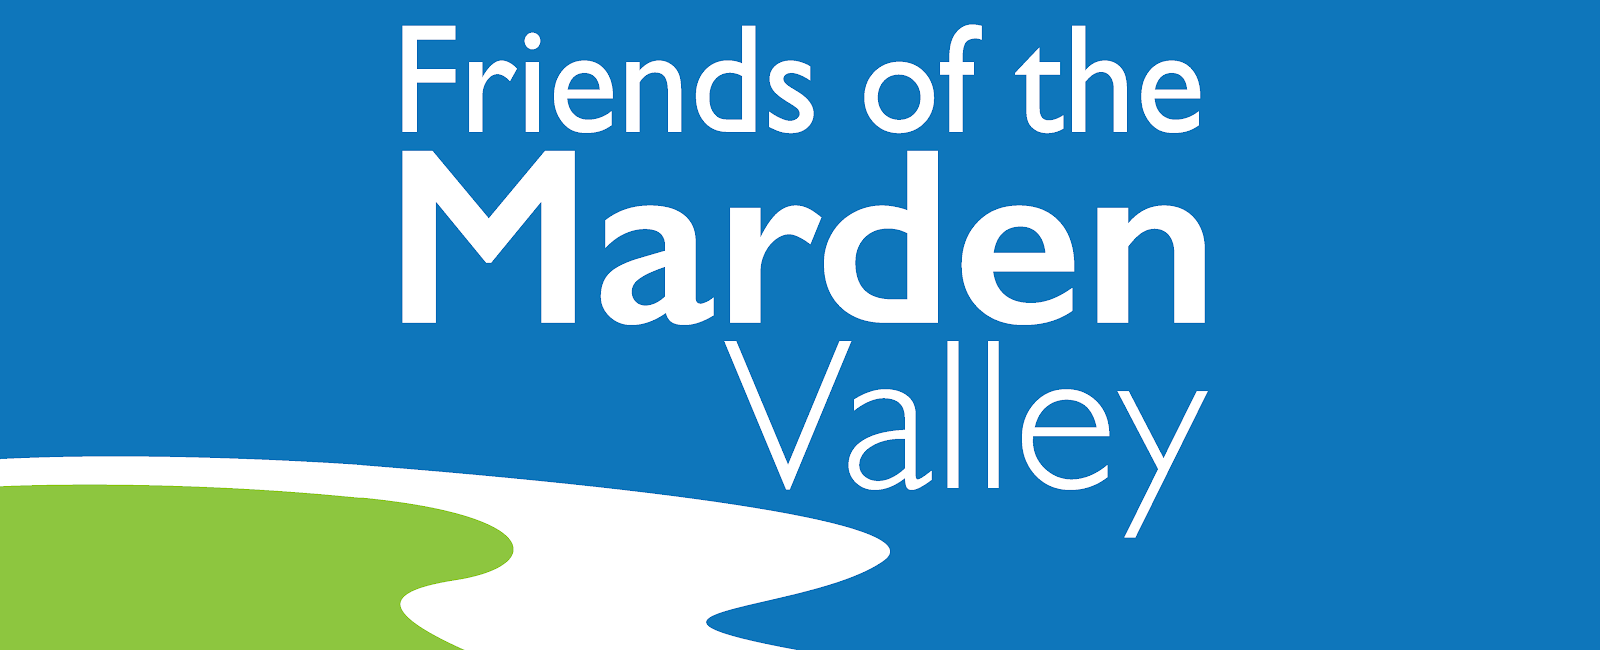 Friends of the Marden Valley